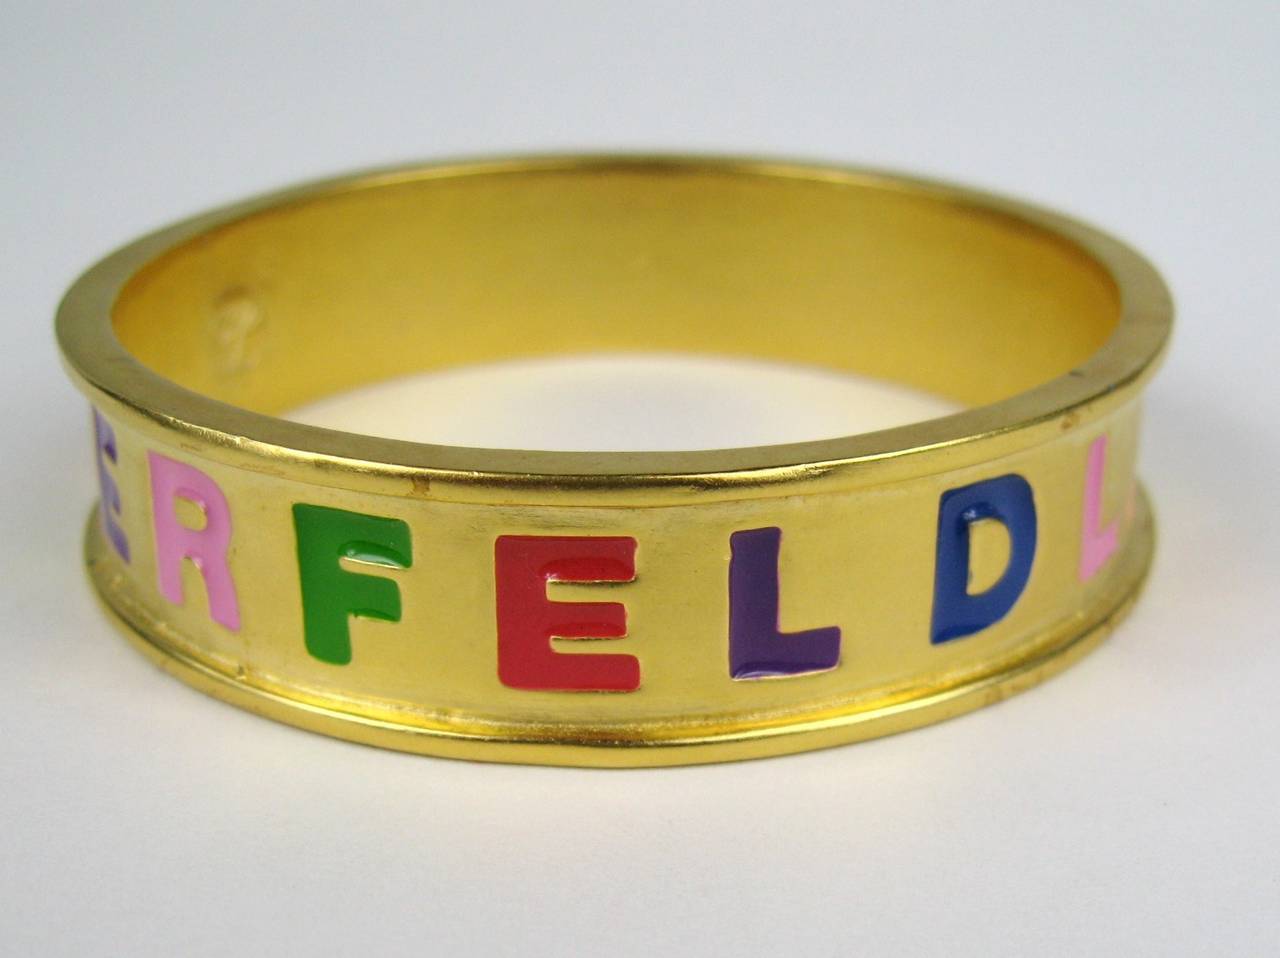 Bangle has large block lettering LAGERFELD. Measuring .66 inches wide Inside diameter 2.69 in Colors of purple, pink, green, red and orange make up the lettering. Necklace, Earrings, charm Bracelet and Bangle are all listed on our storefront. This